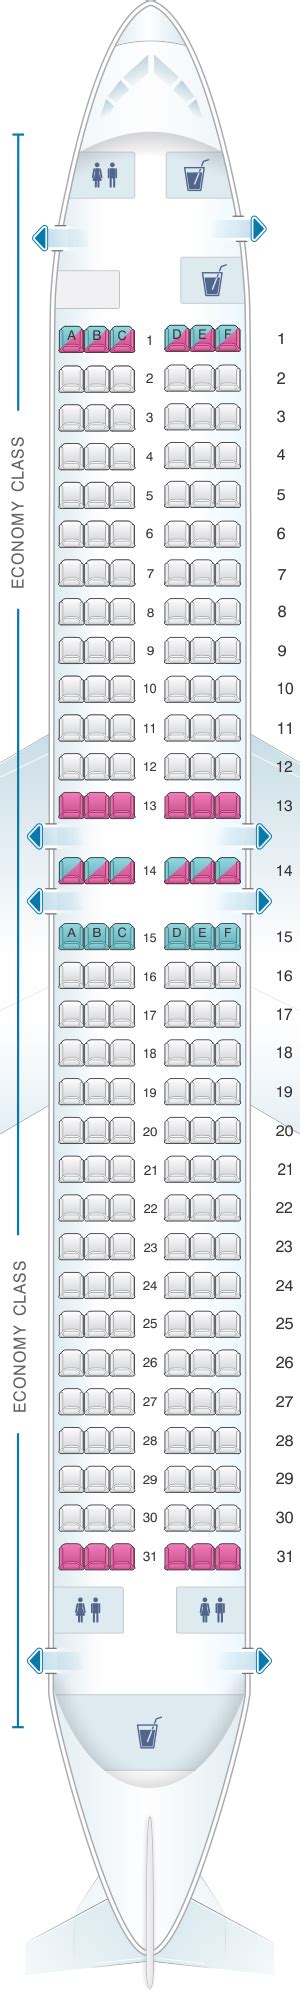 Seat Map Sunexpress Boeing B737 800 Seatmaestro Images And Photos Finder